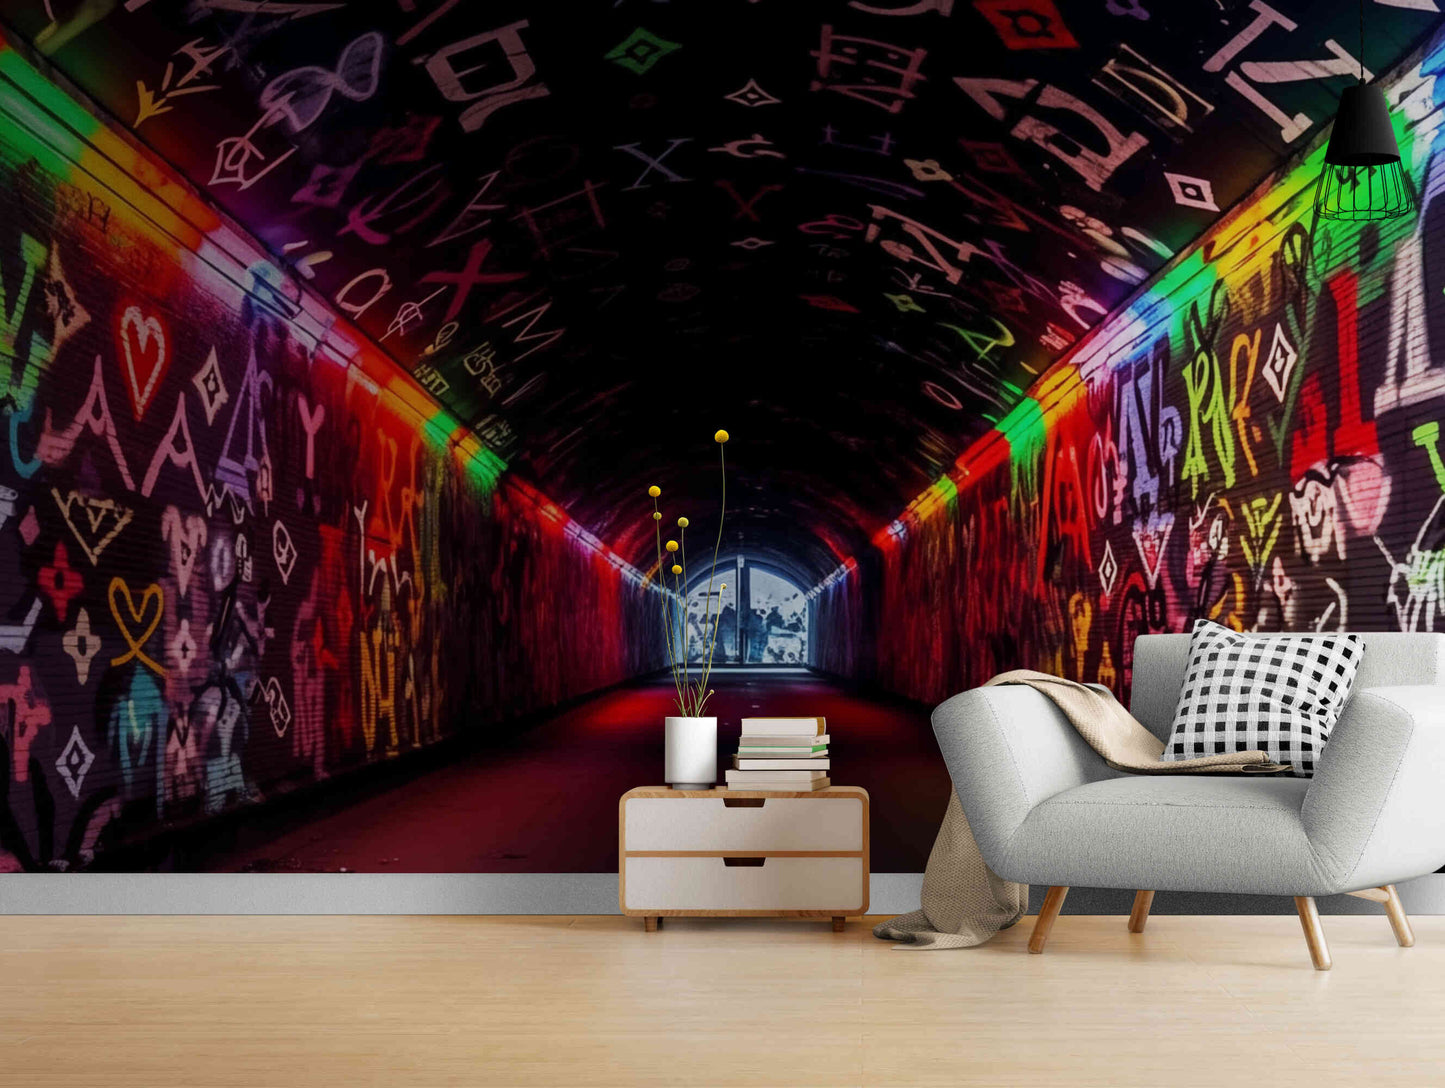 Neon green lights up the urban vibe in this graffiti wall mural, bringing the energy of the streets indoors.